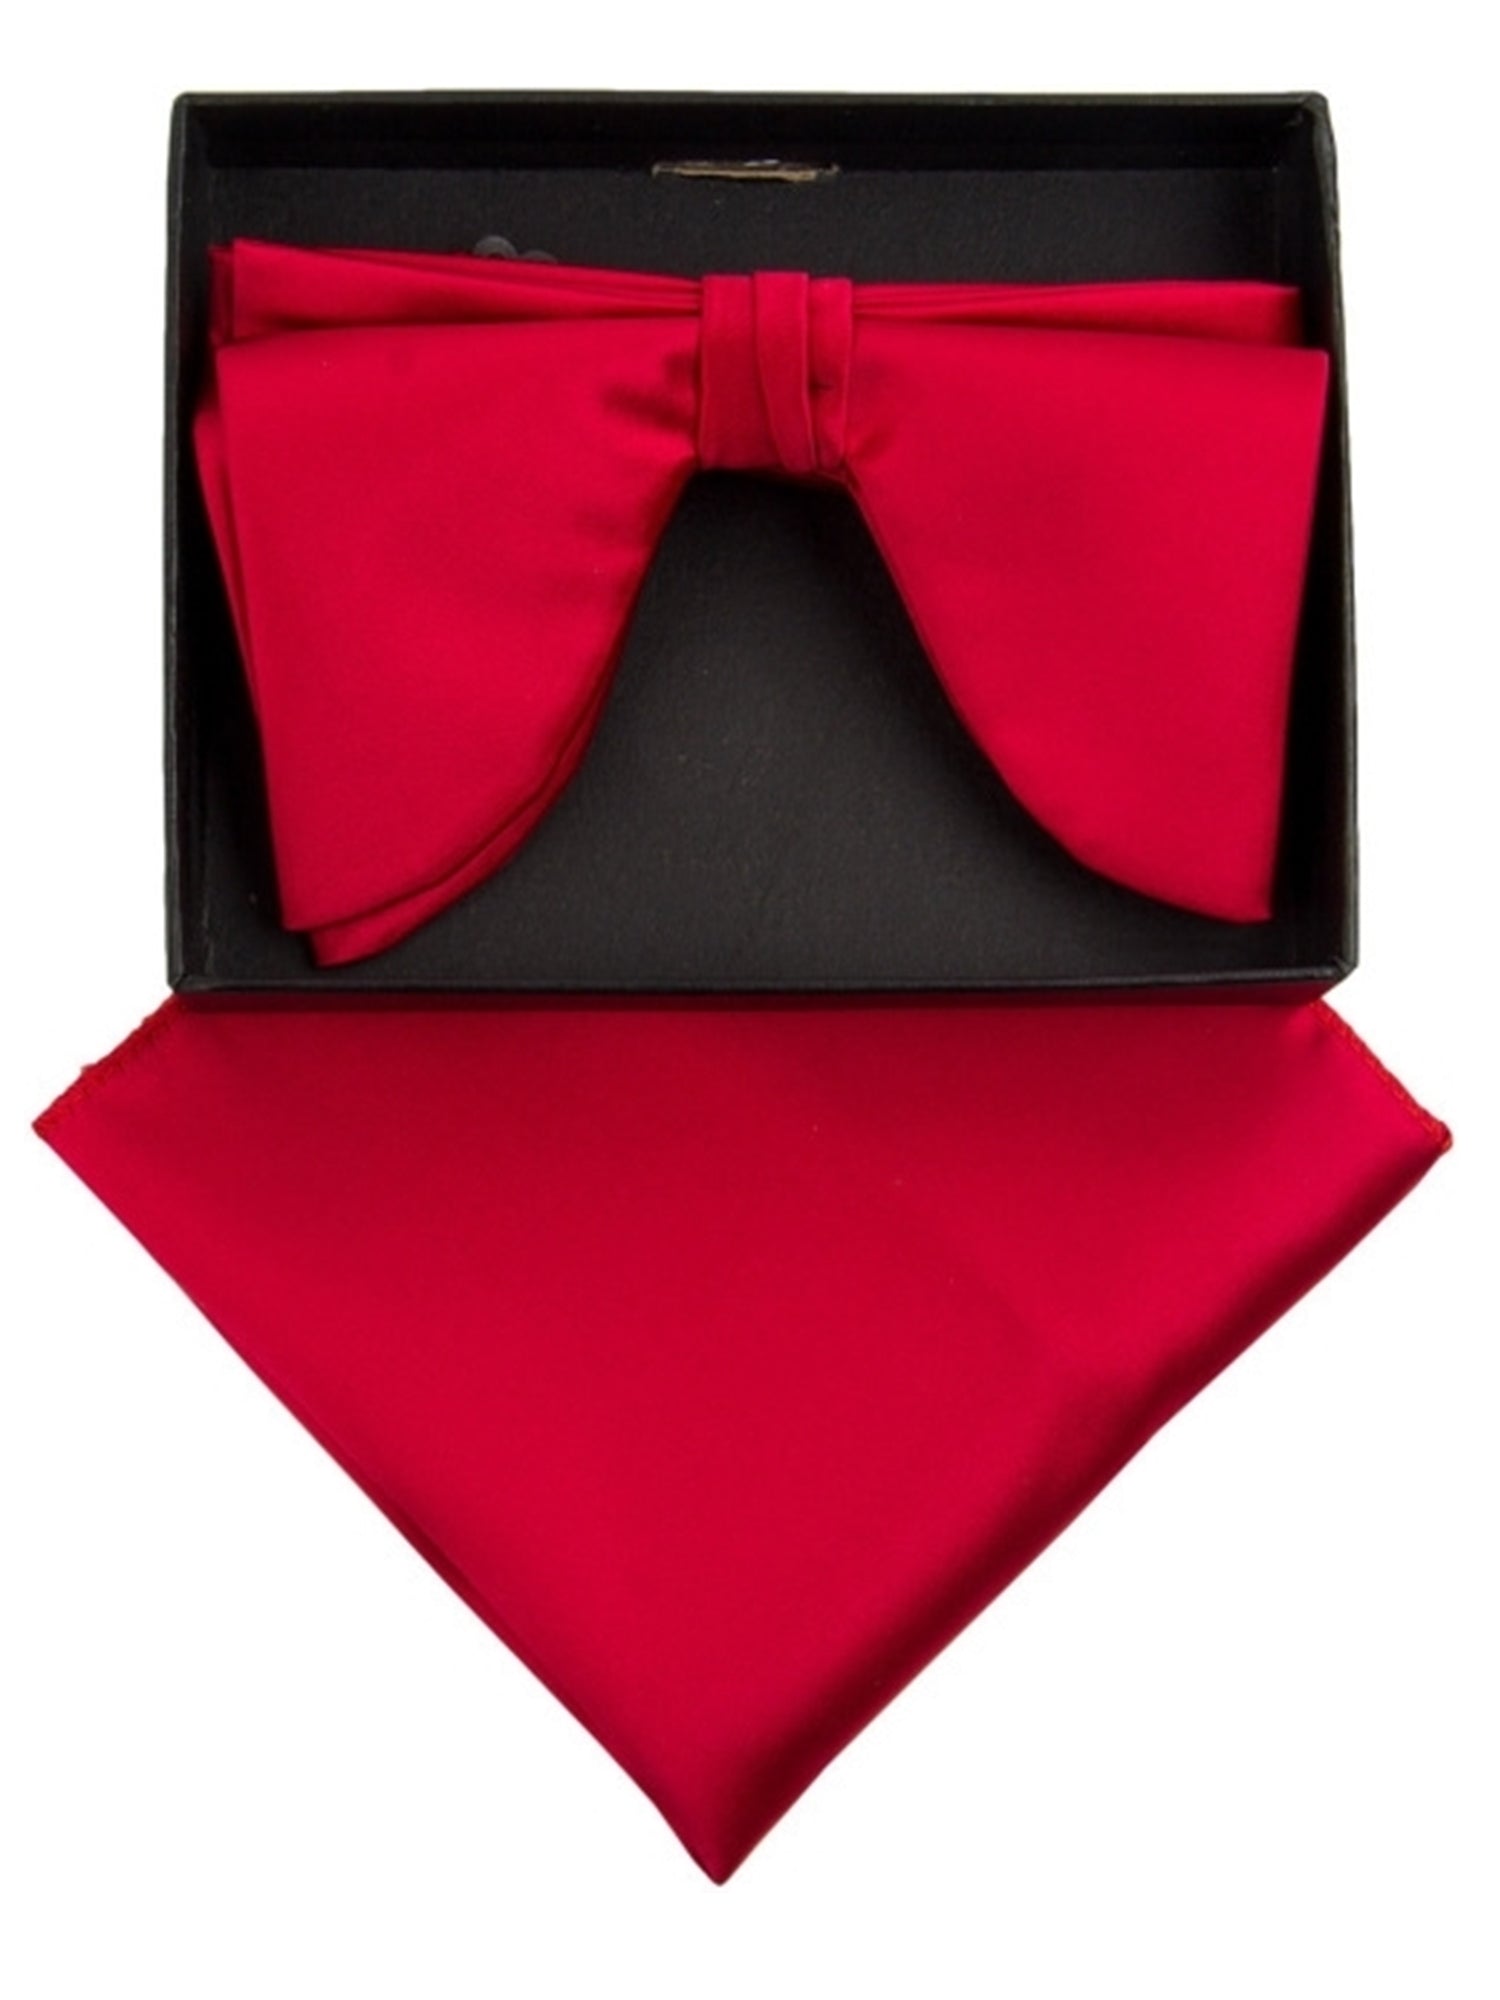 Men's Edwardian Wedding PreTied Tuxedo Bow Tie Adjustable Length W/Hanky Men's Solid Color Bow Tie TheDapperTie Red One Size 